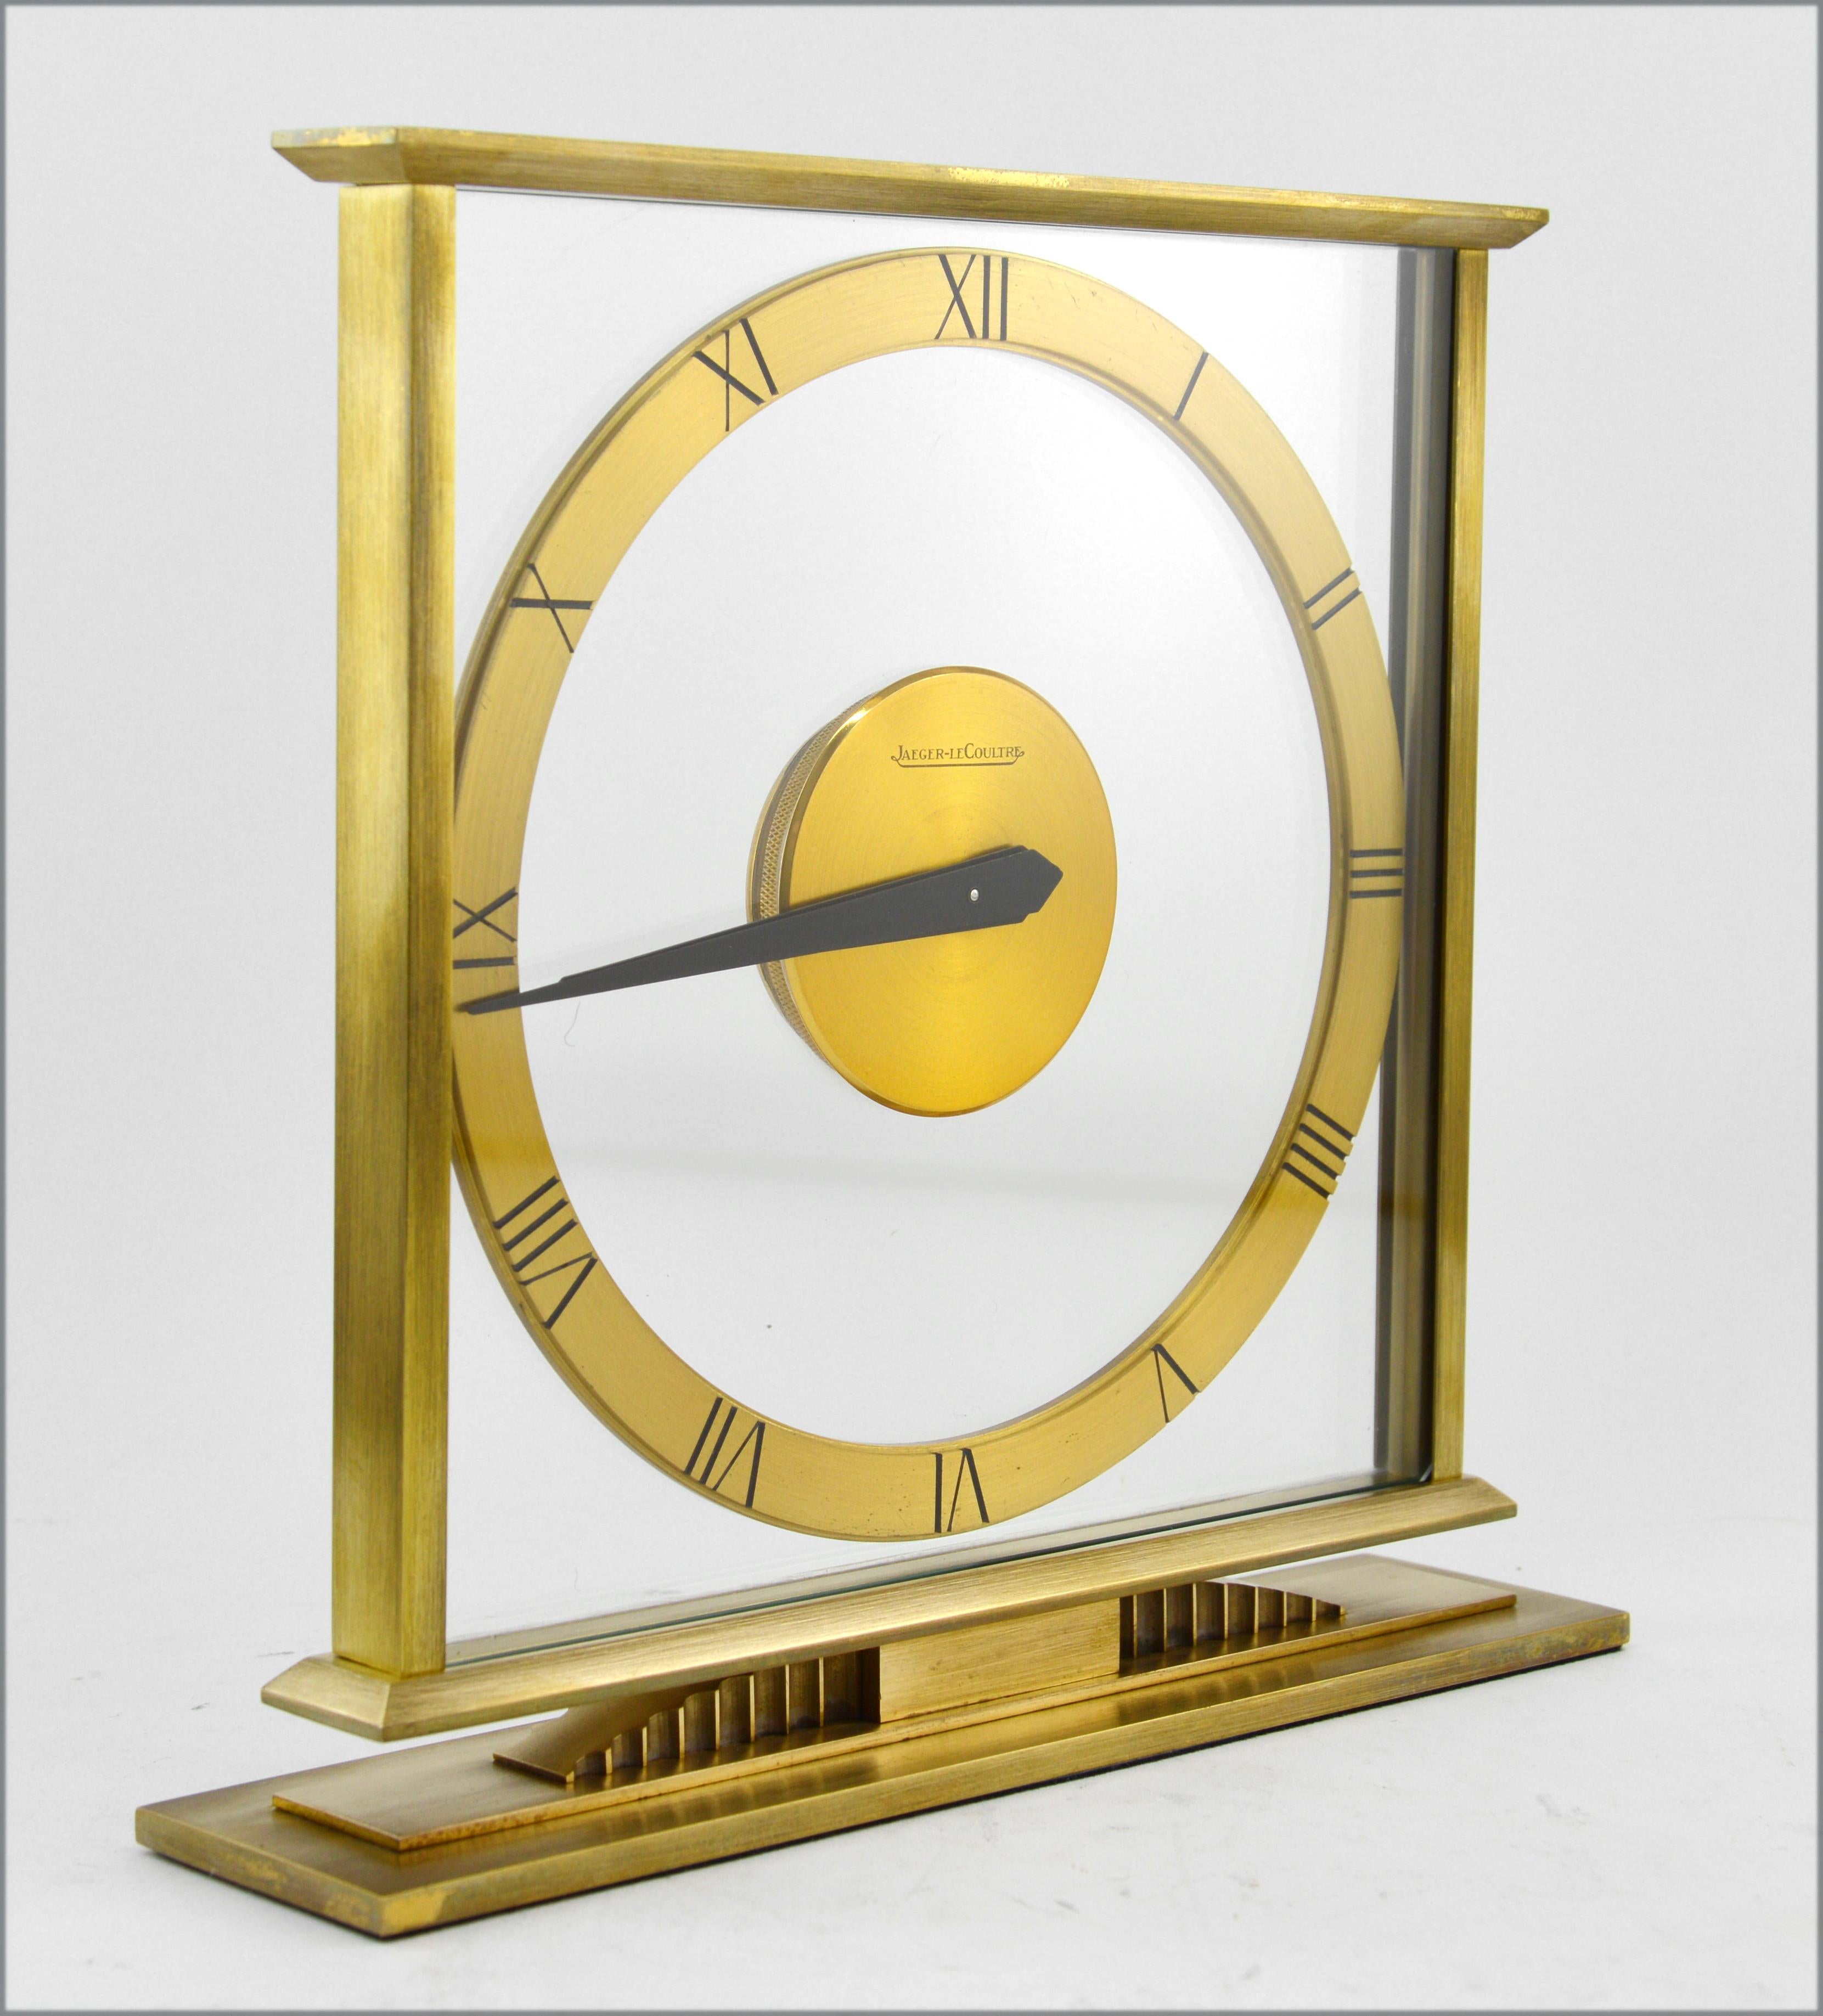 Midcentury table clock by Jaeger-LeCoultre, Switzerland, 1940s-1950s. Brass dial and body. Glass front plate. Plastic back plate. 8 days movement. Measures: Height 7.7